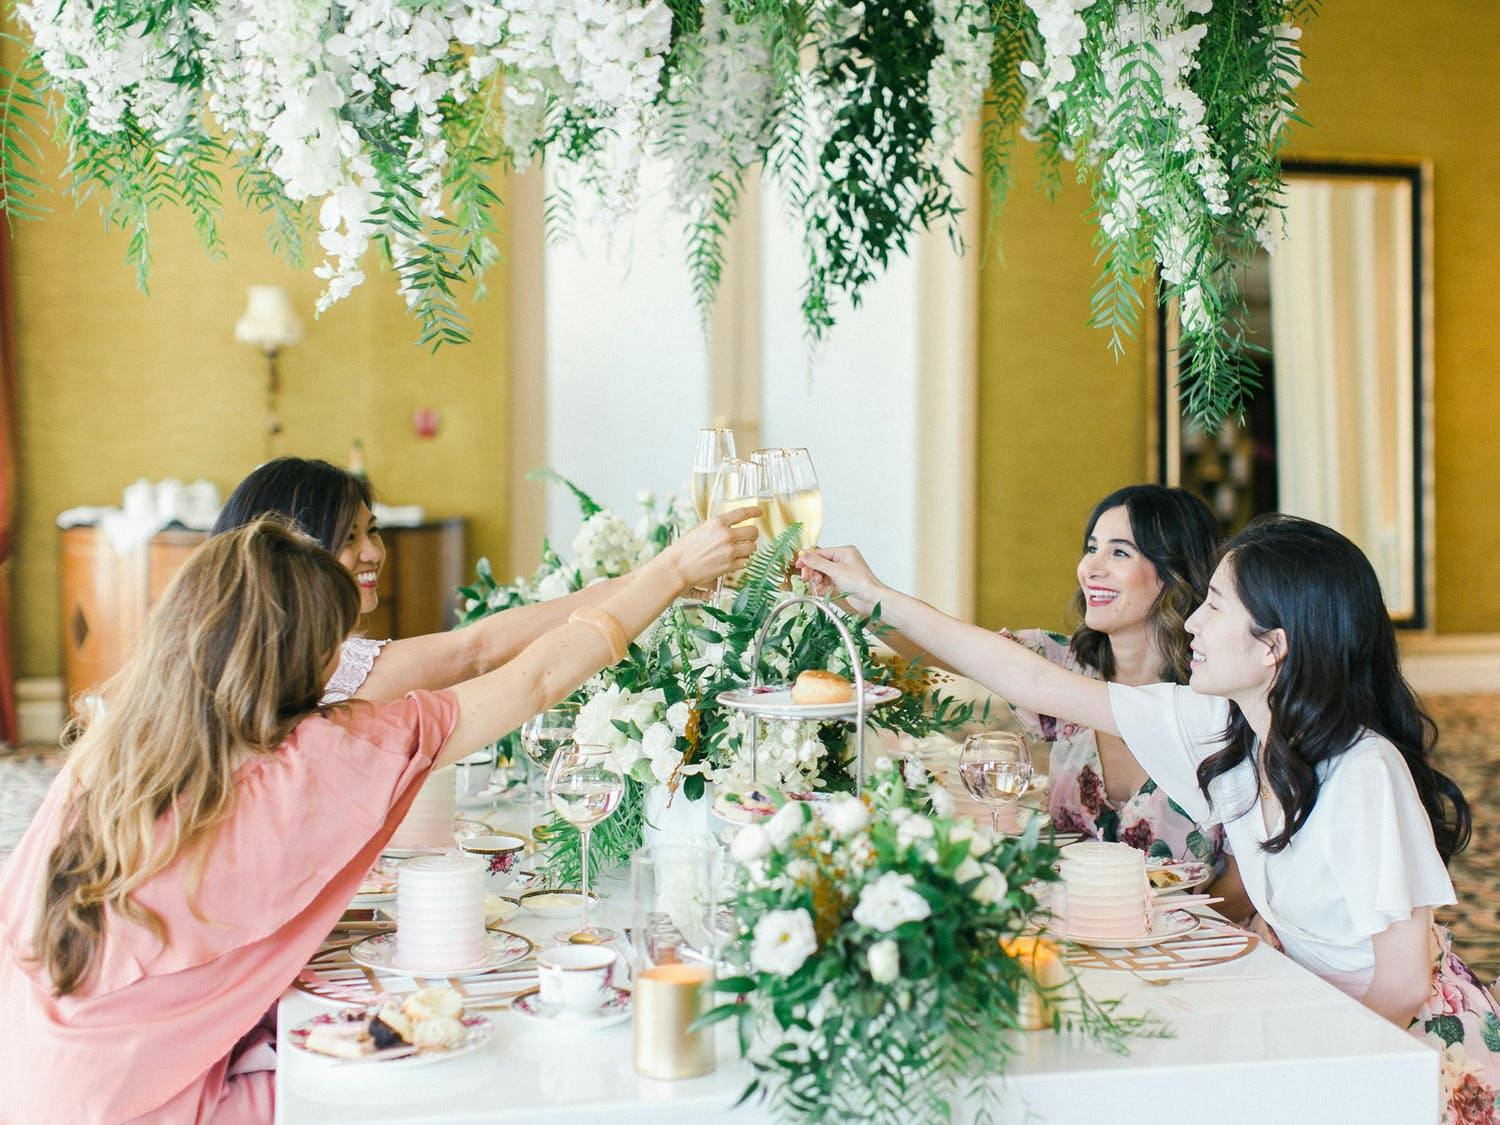 Women gather at table beneath lavish greenery at The Langham Huntington Hotel for product launch event | PartySlate